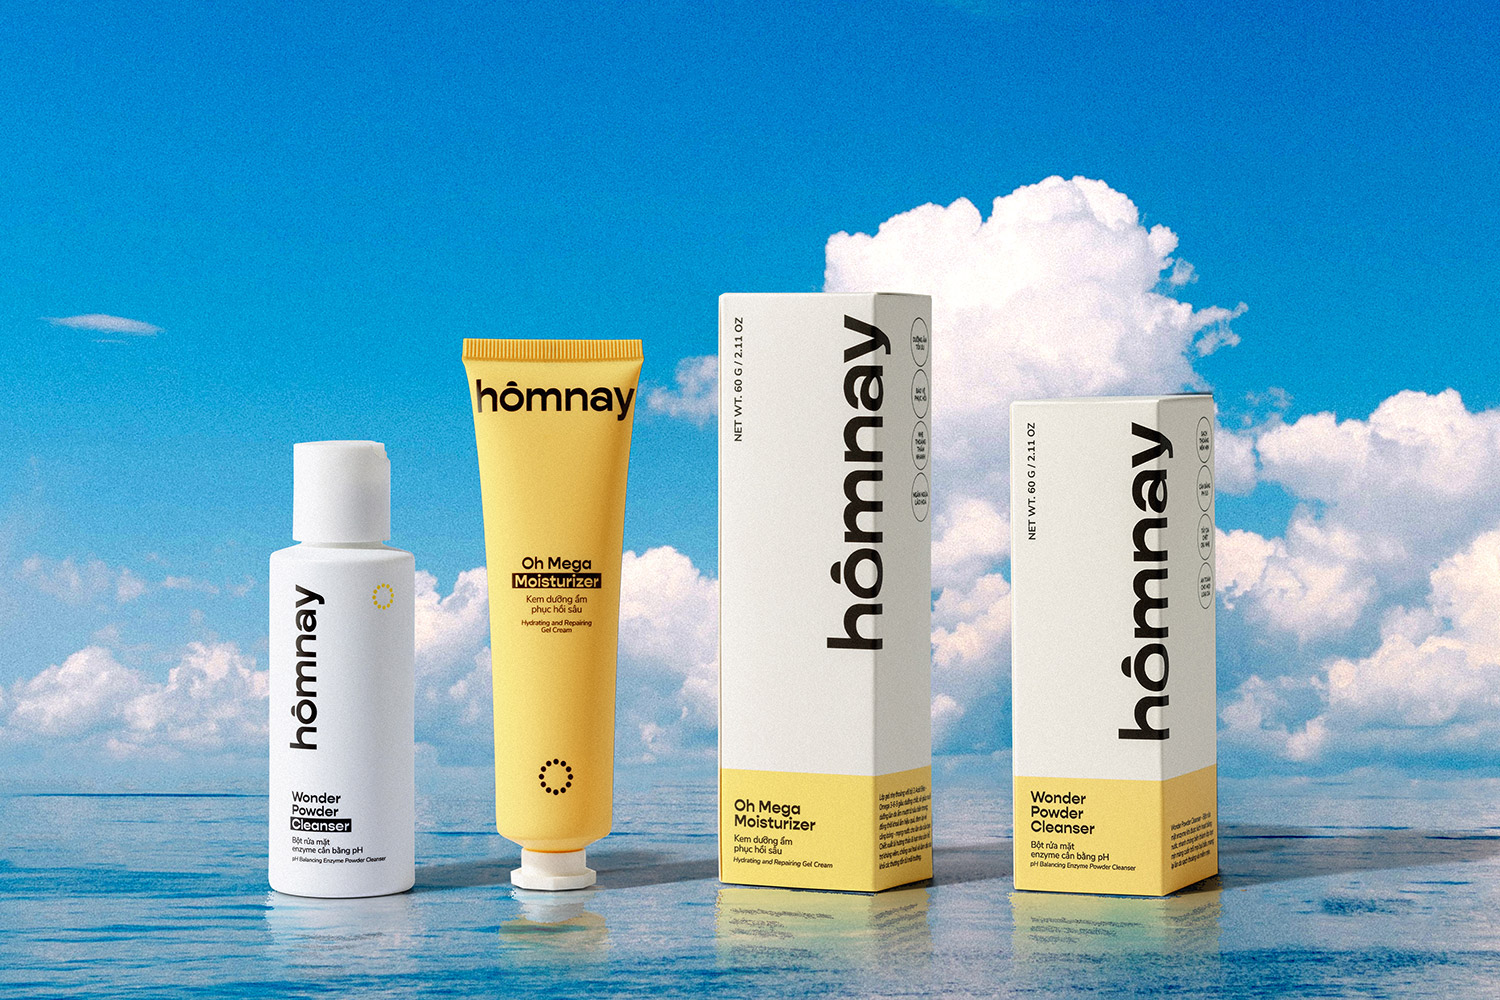 homnay beauty packaging with blue sky background